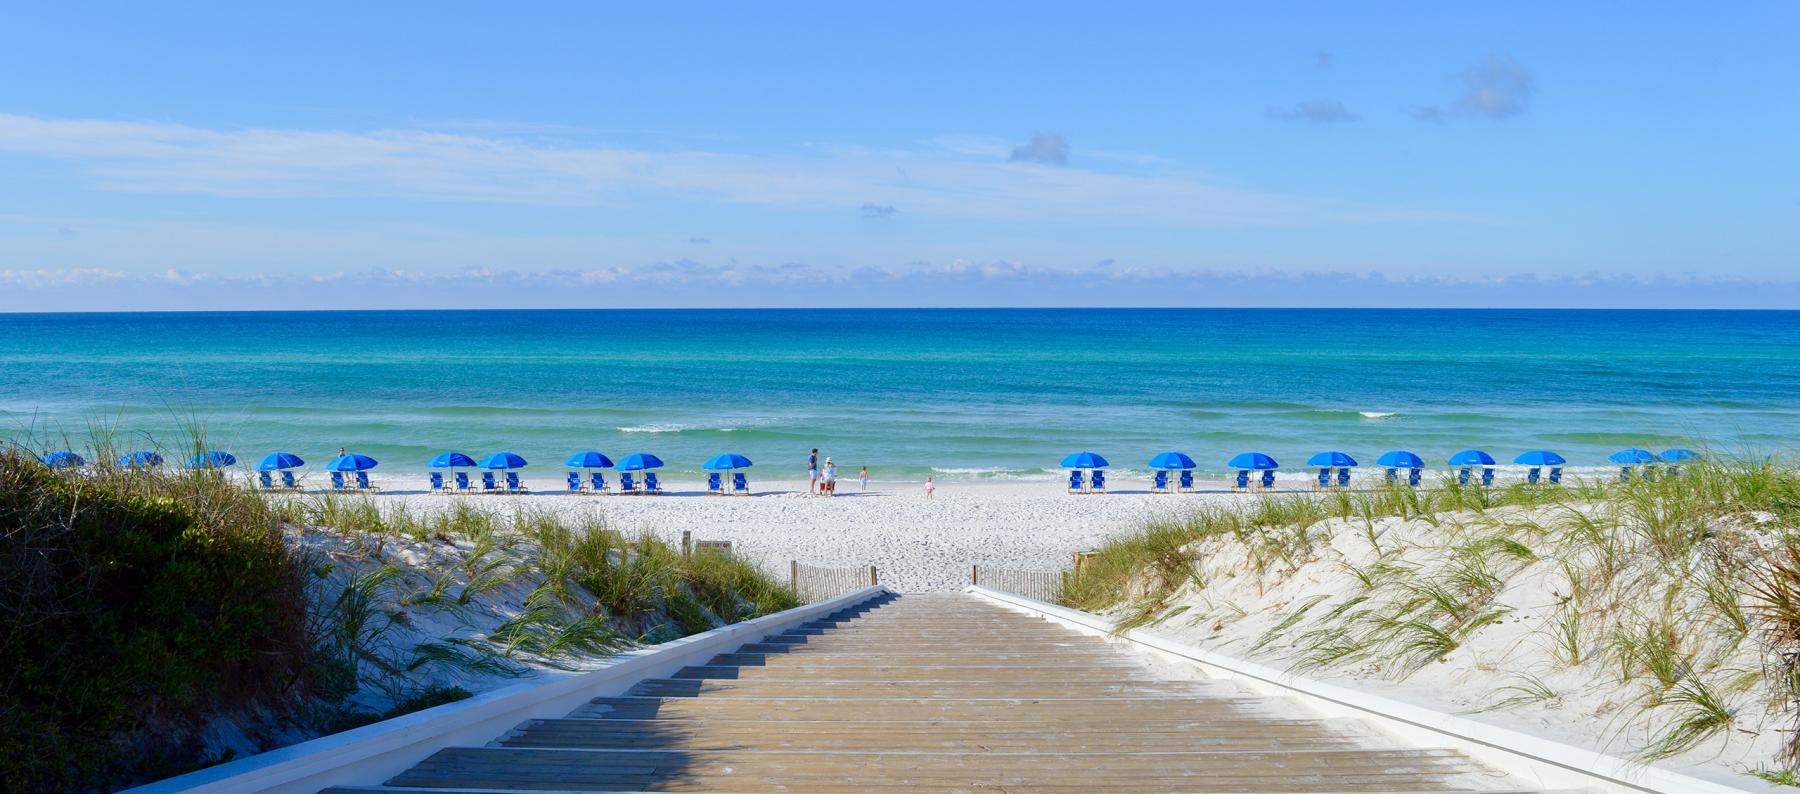 Seaside Florida Vacation Rentals on 30A: Homeowner #39 s Collection